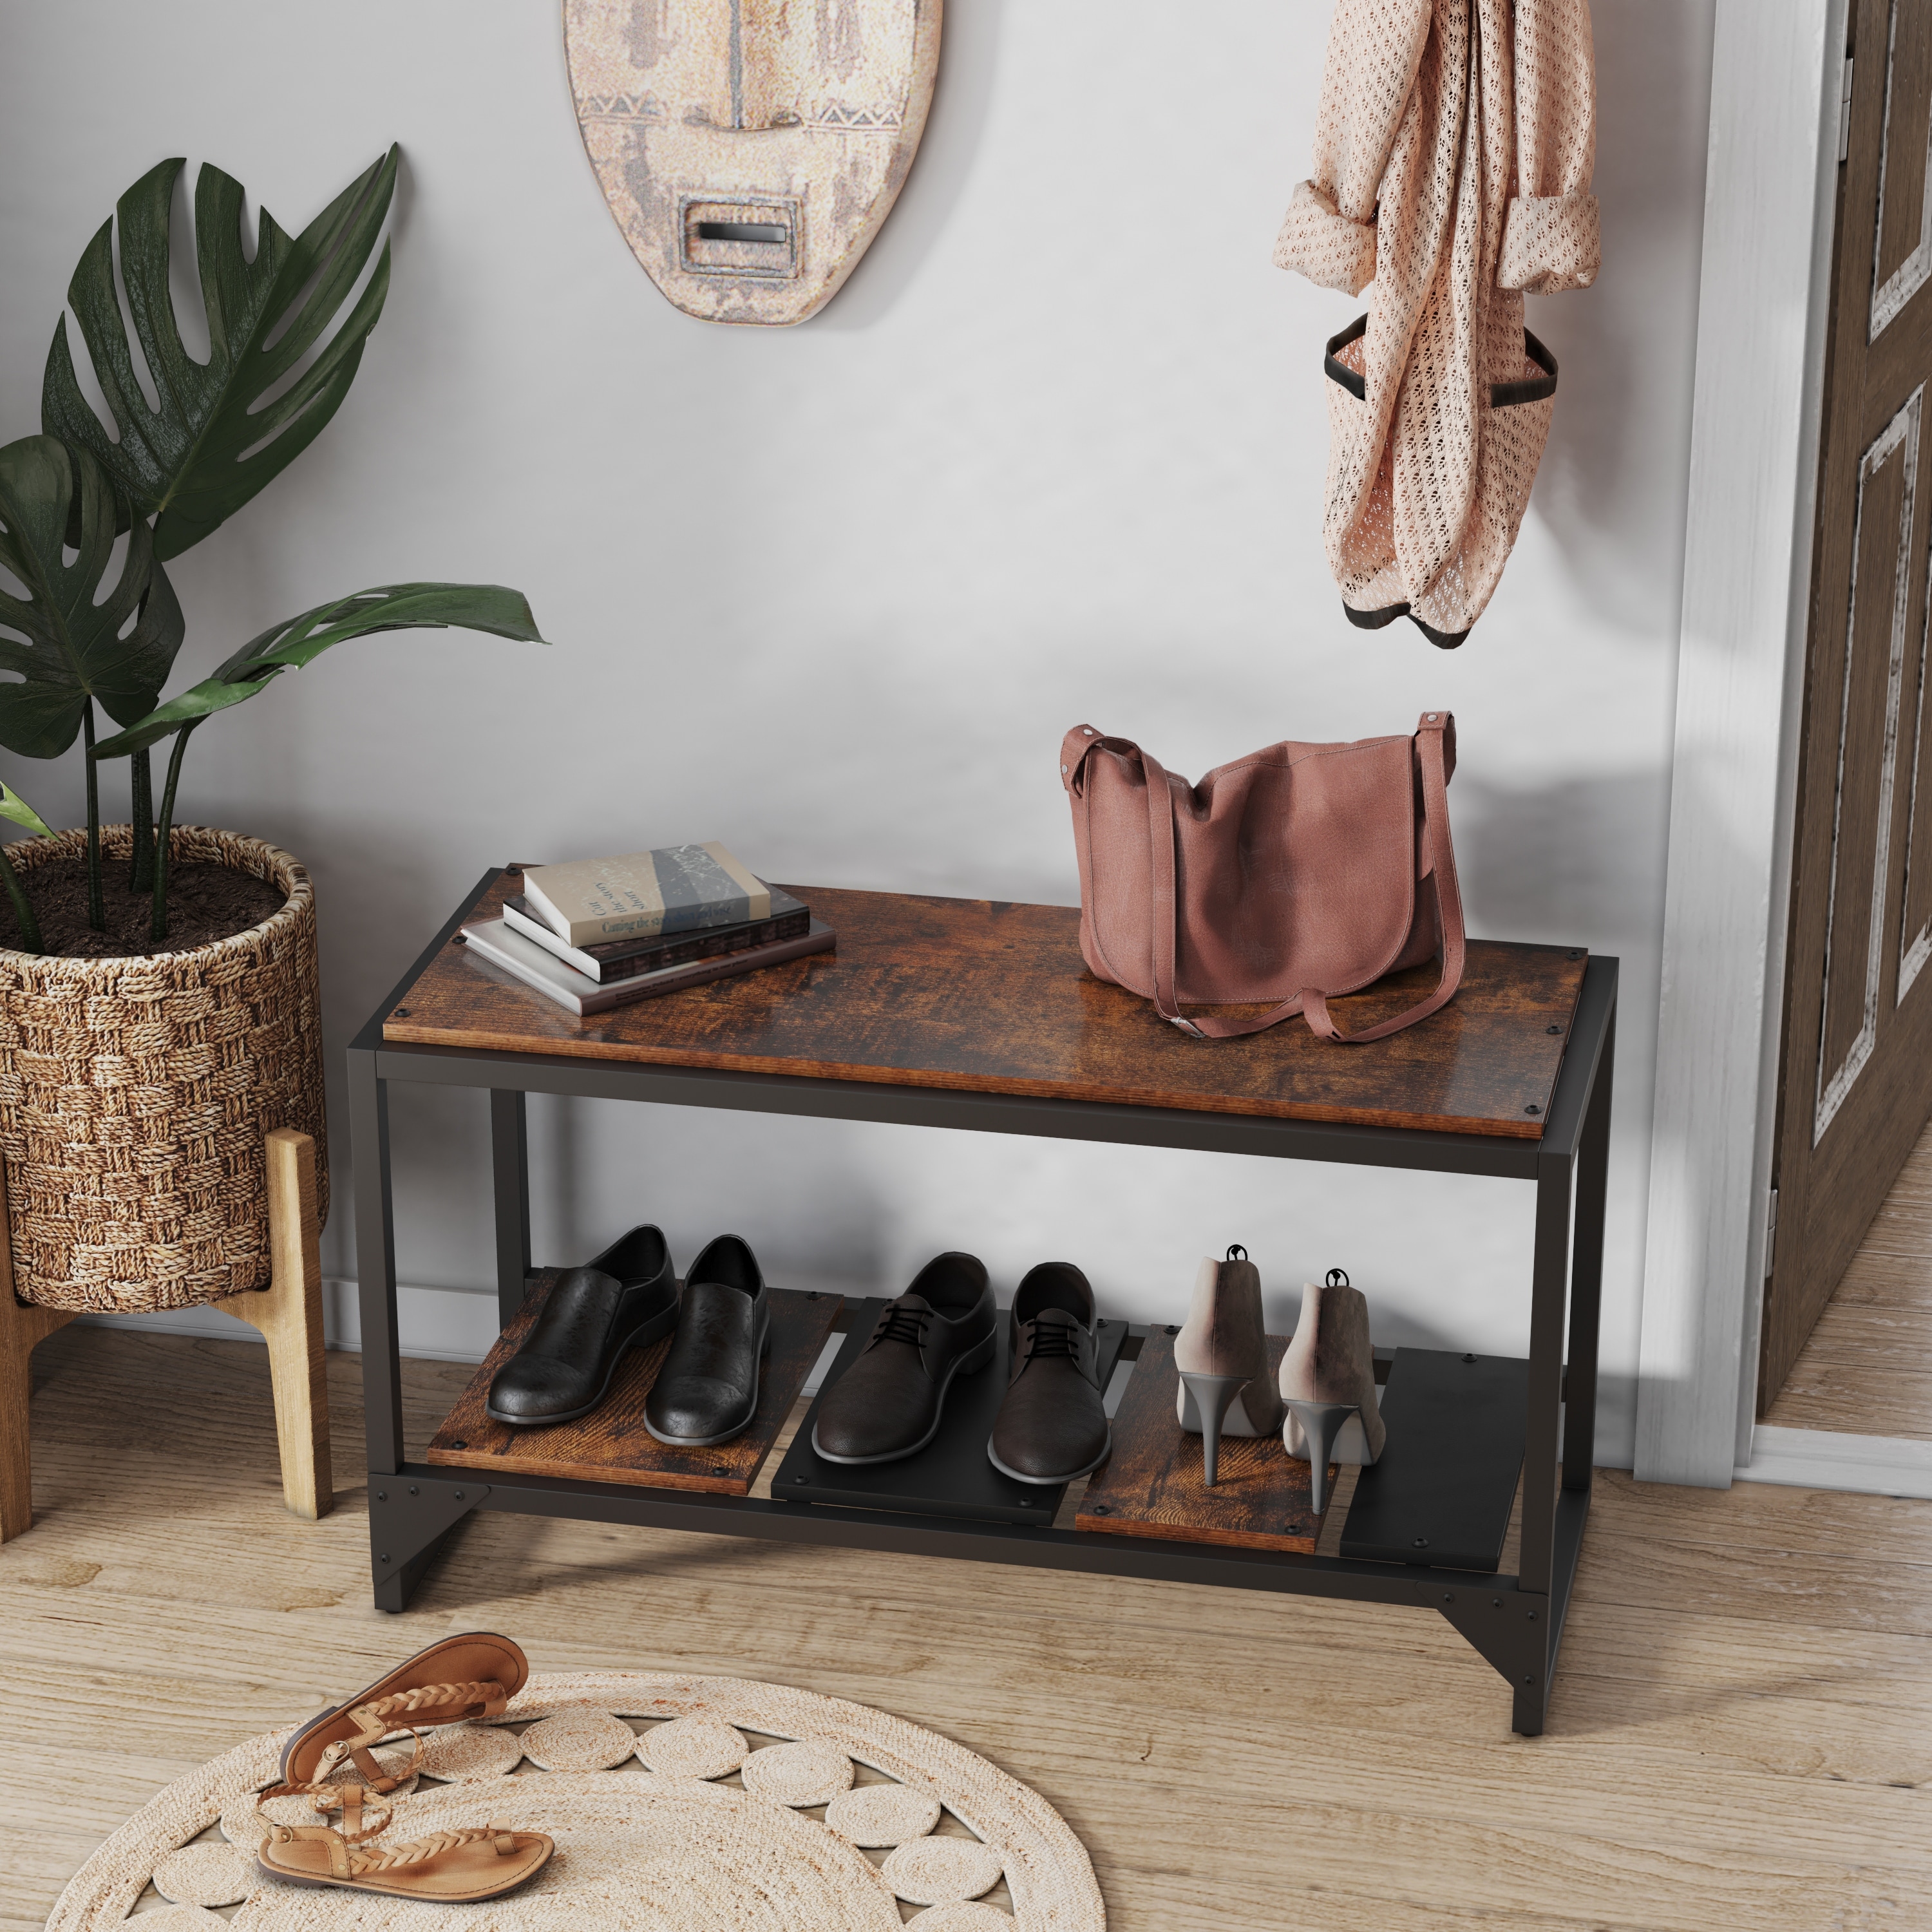 https://ak1.ostkcdn.com/images/products/is/images/direct/6f95ade9c905d11d6fddfa9d944ec41ce7c1dc71/Entryway-Shoe-Rack-Bench-with-2-Tier.jpg